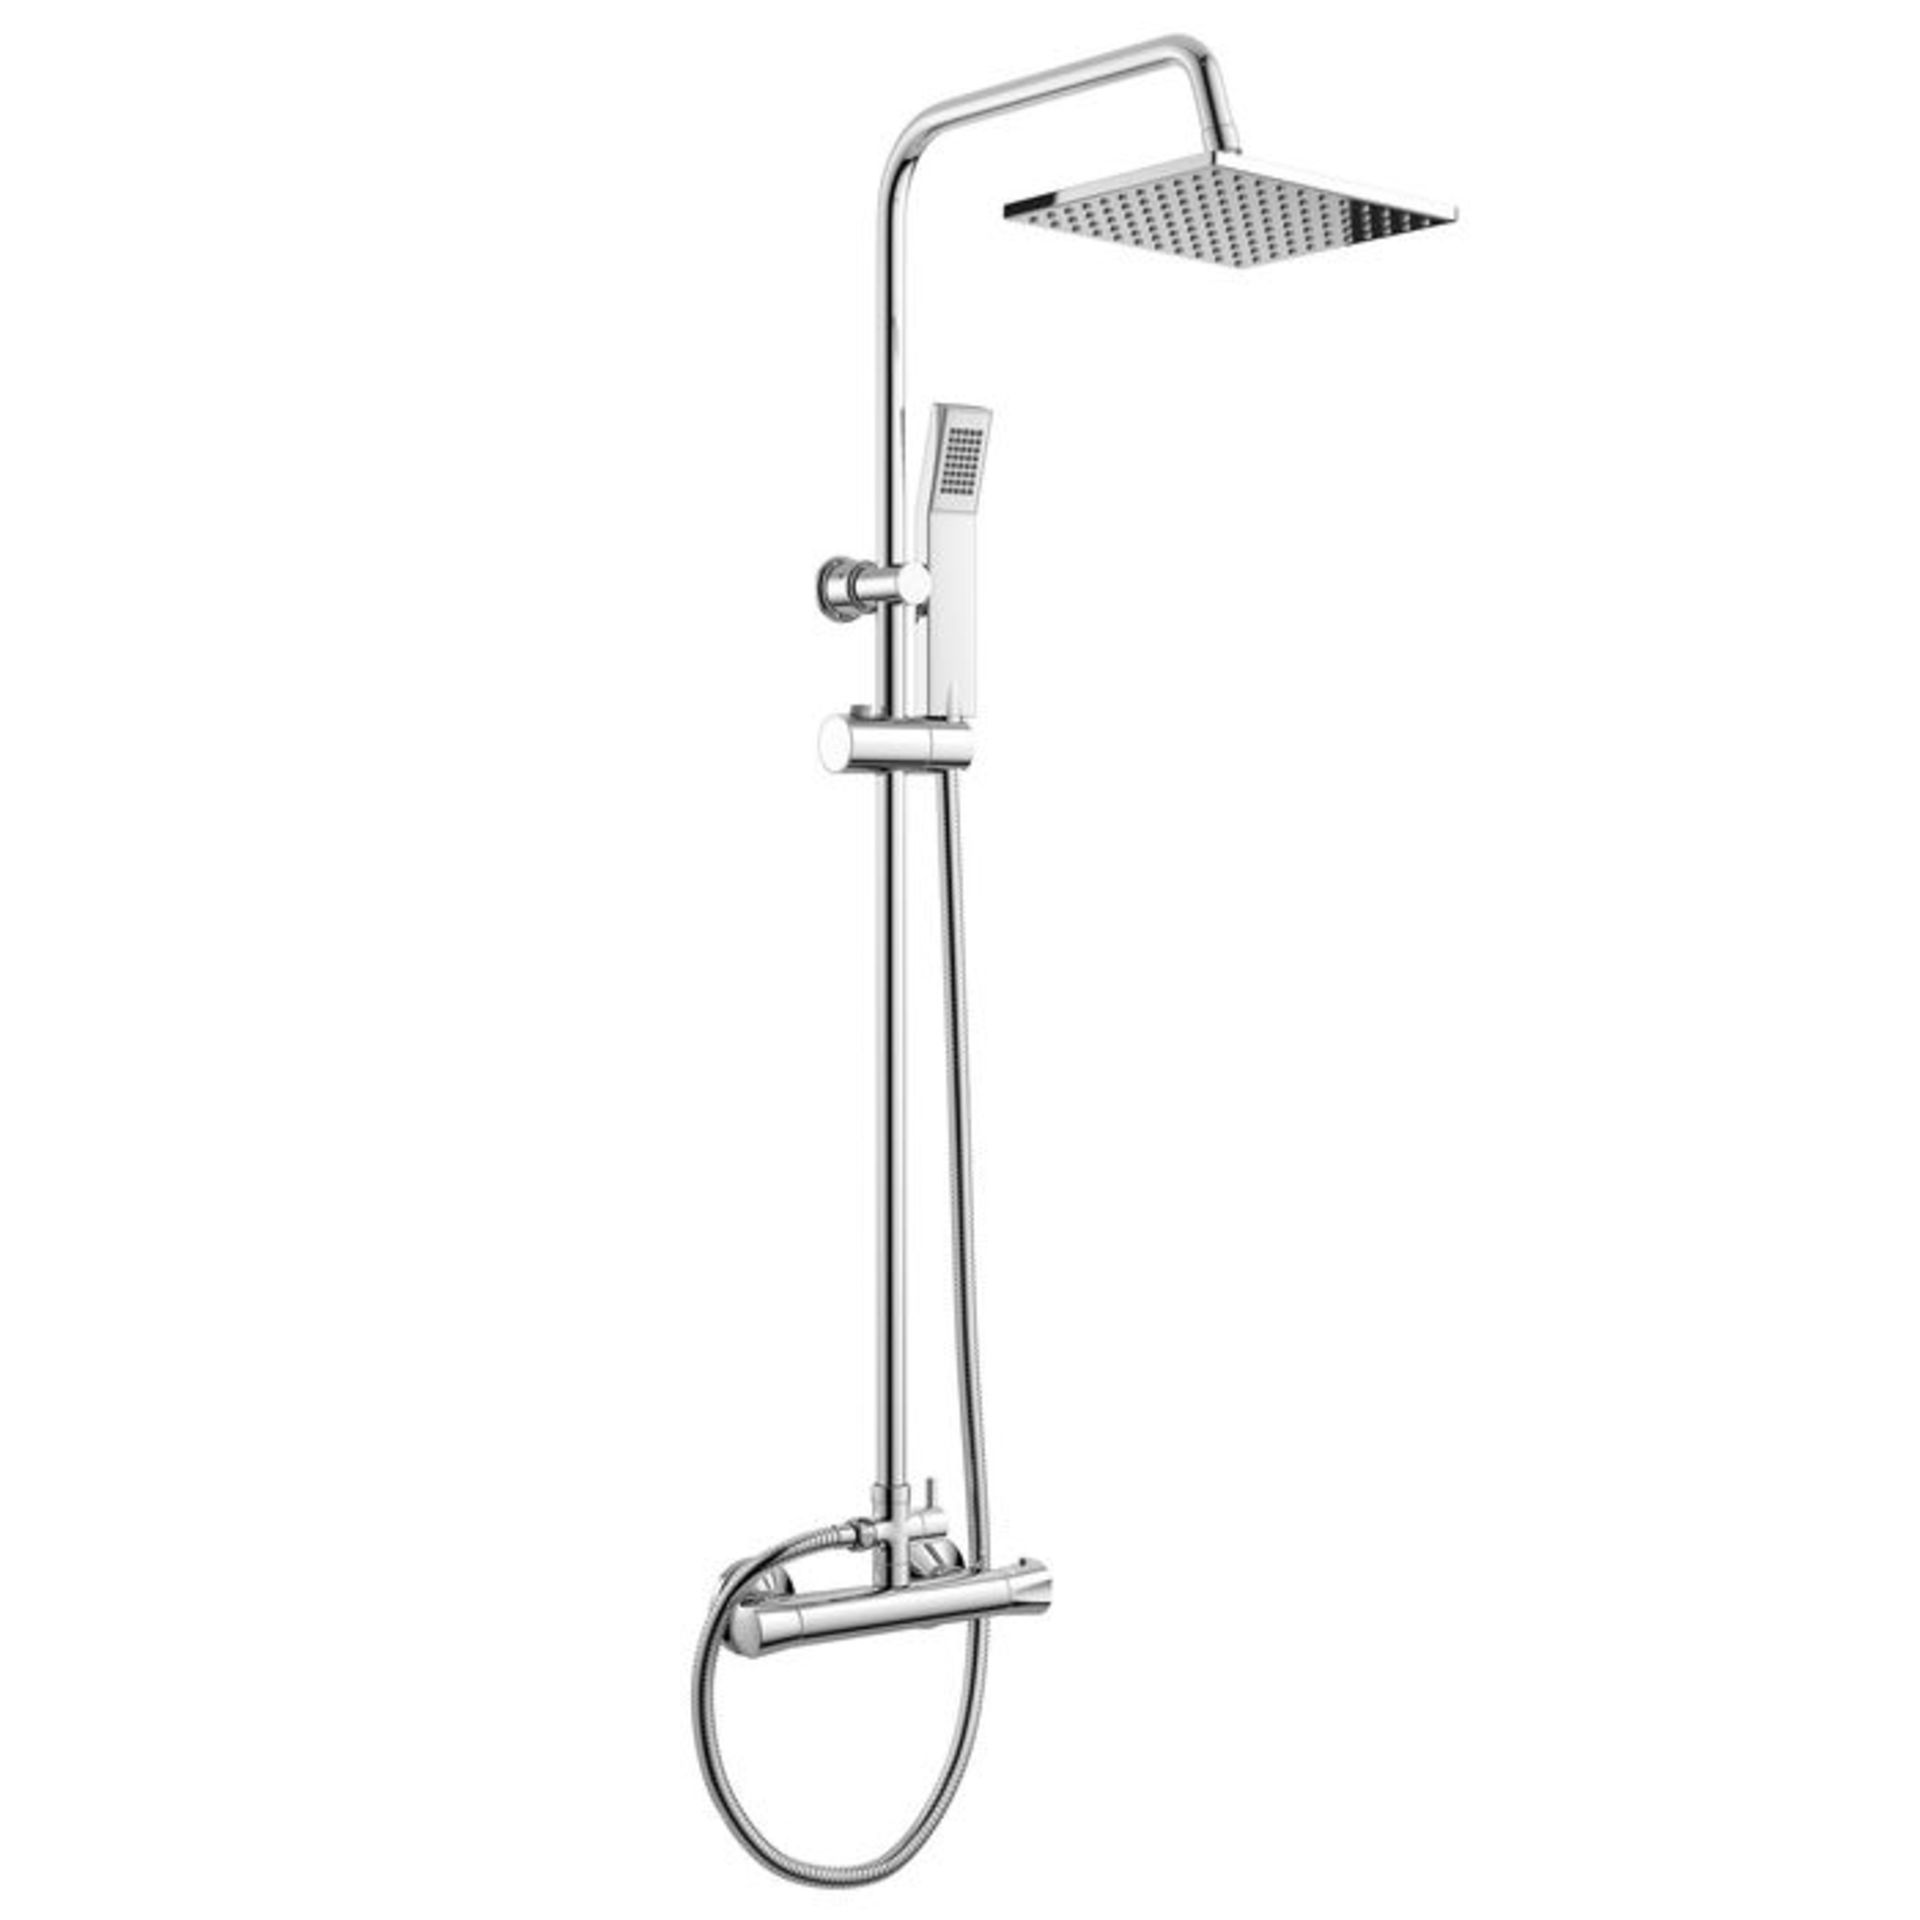 (PA215) Square Exposed Thermostatic Shower Kit & Medium Head. Curved features and contemporary